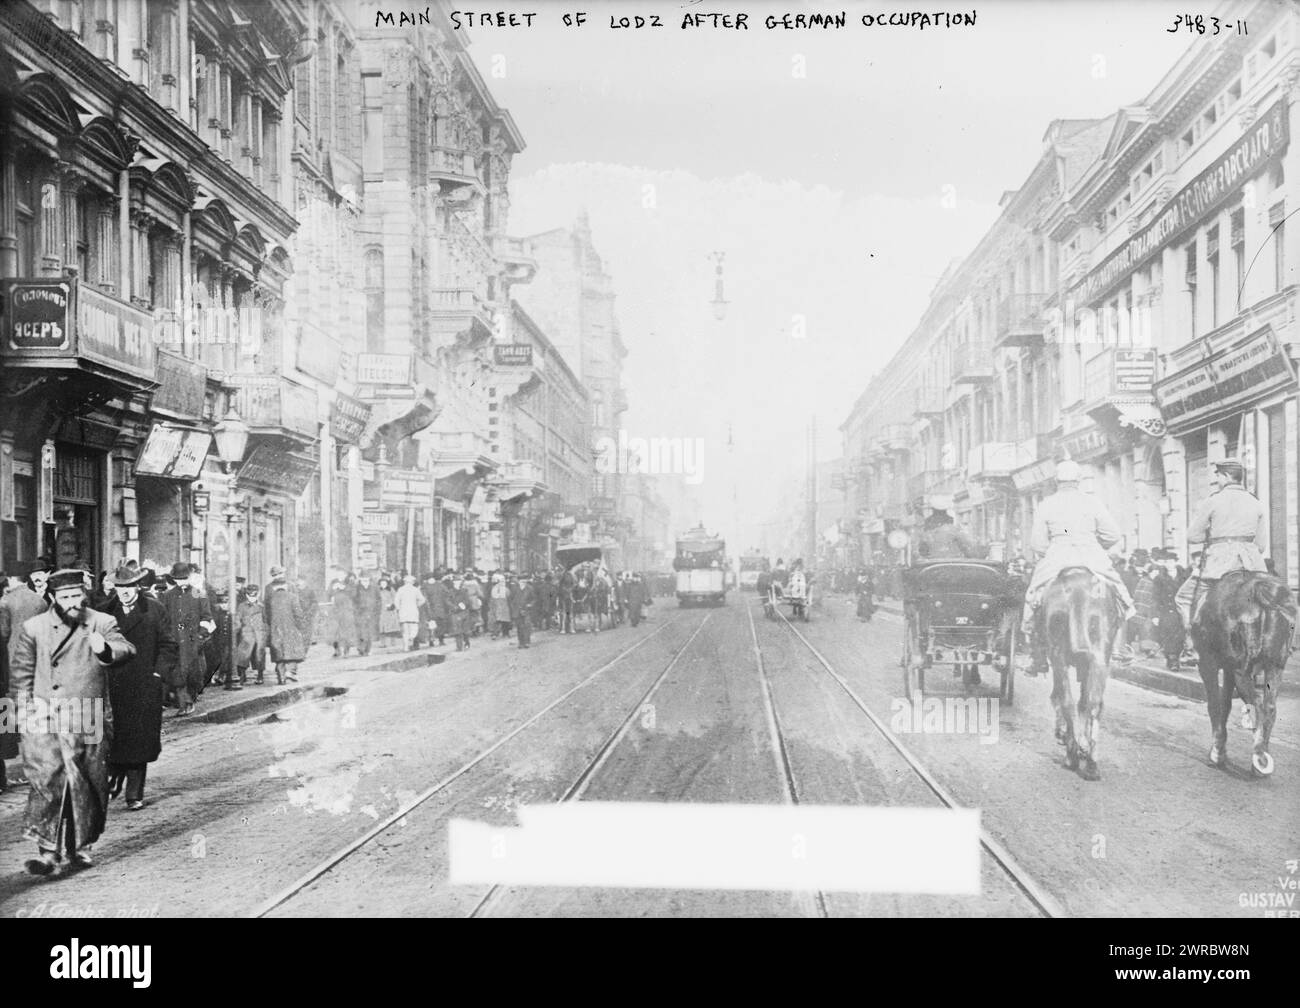 Main street of Lodz after German Occupation, Photograph probably shows Piotrkowska Street in Lodz, Poland during World War I., between 1914 and 1915, World War, 1914-1918, Glass negatives, 1 negative: glass Stock Photo